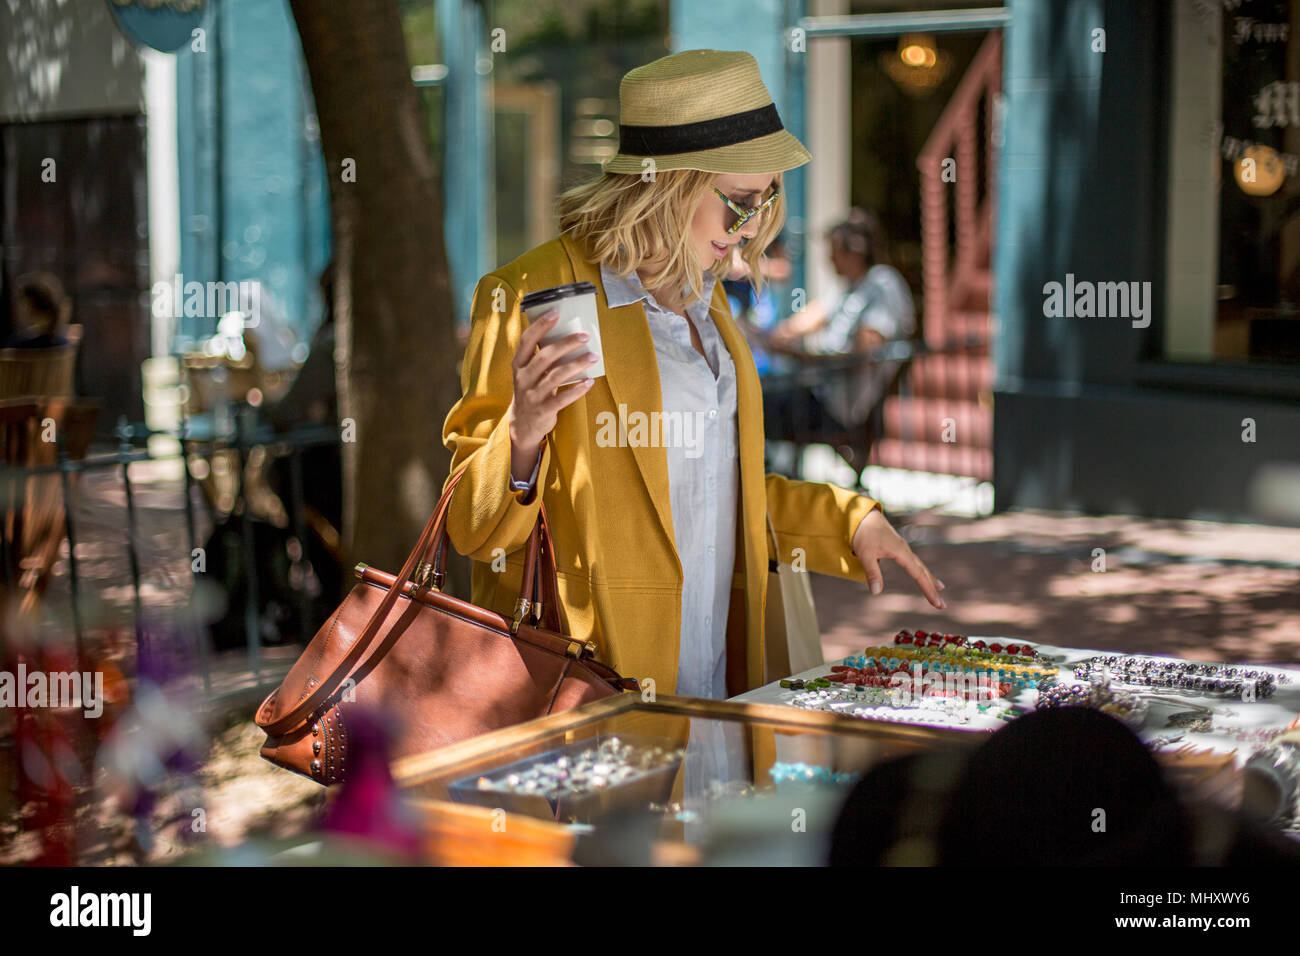 Woman at outdoor market stall, Cape Town, South Africa Stock Photo